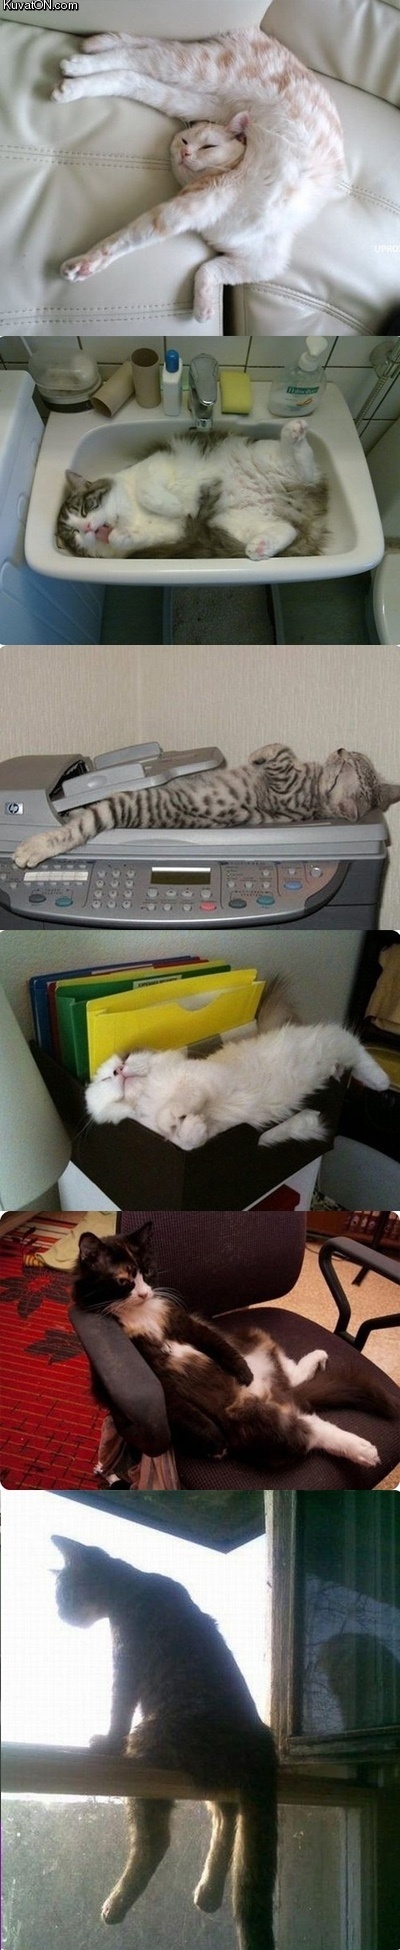 relaxed_cats.jpg